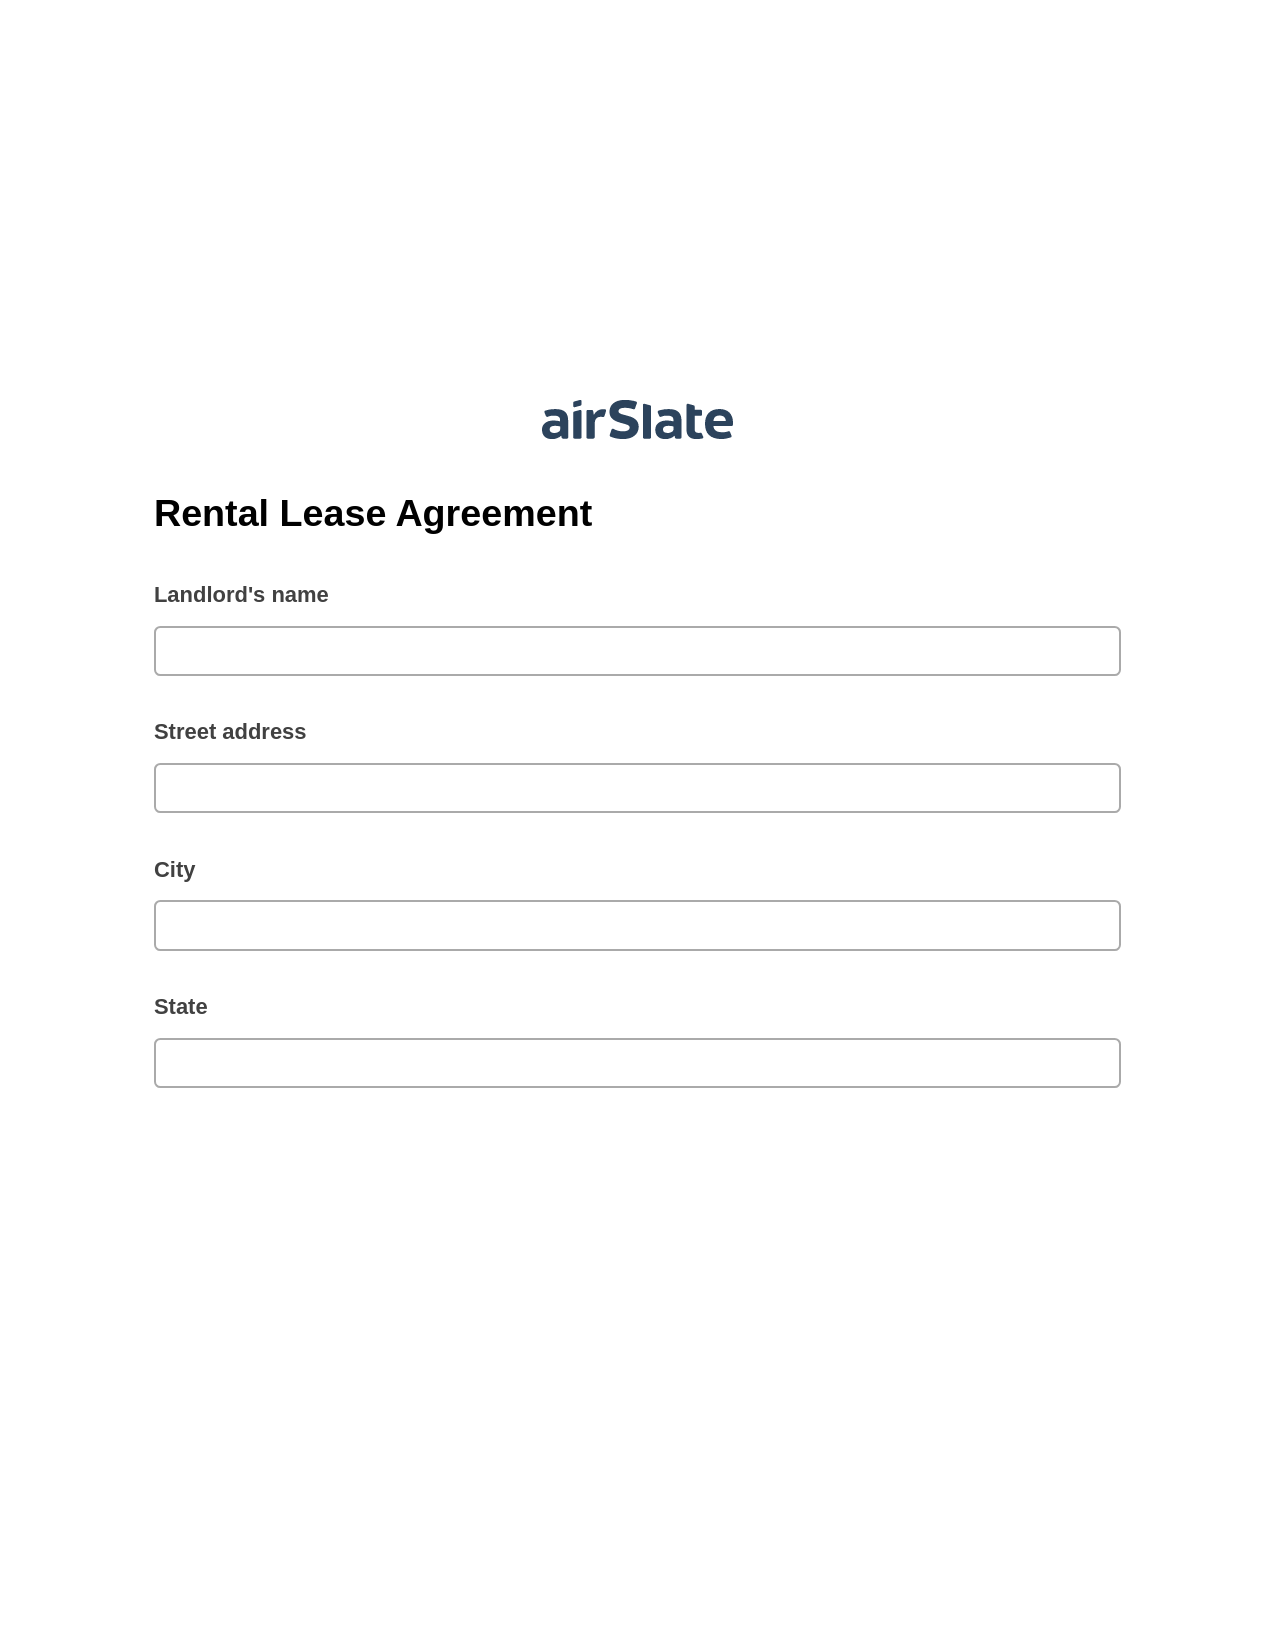 Rental Lease Agreement Pre-fill Dropdowns from Smartsheet Bot, Create NetSuite Records Bot, Export to Excel 365 Bot